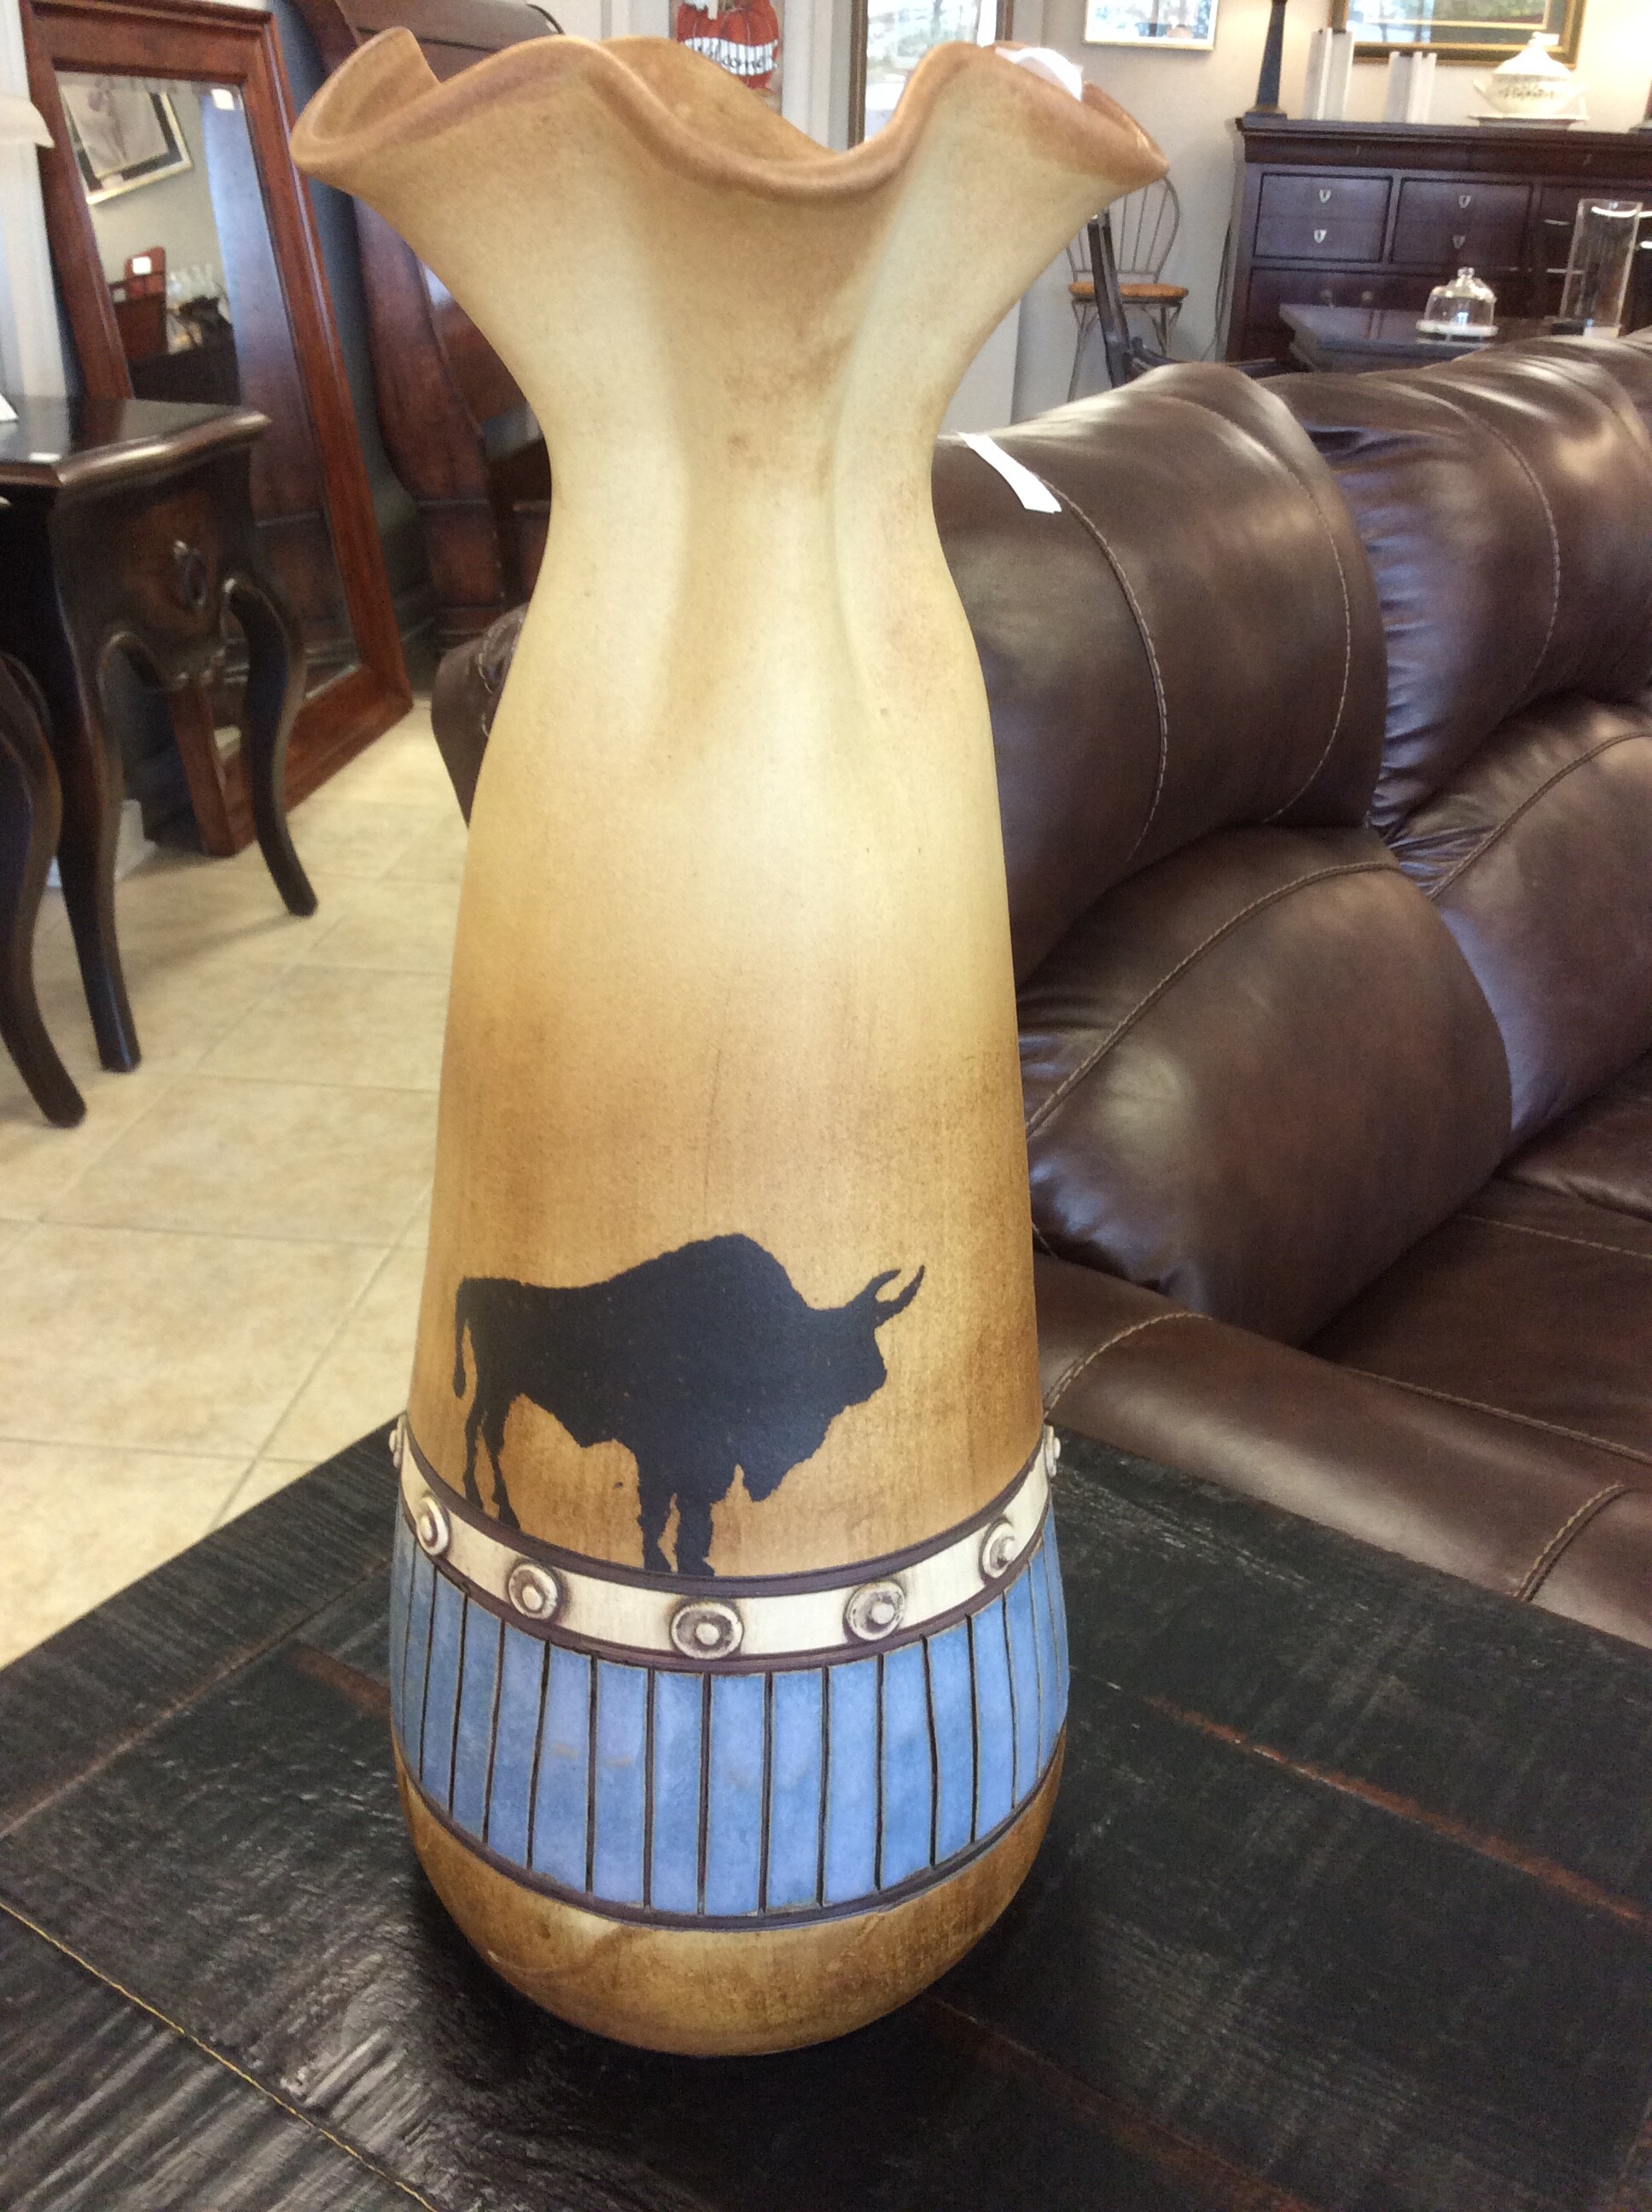 Painted buffalo design with a blue, black, and white pattern around the base of the vase.  This is a nice piece.